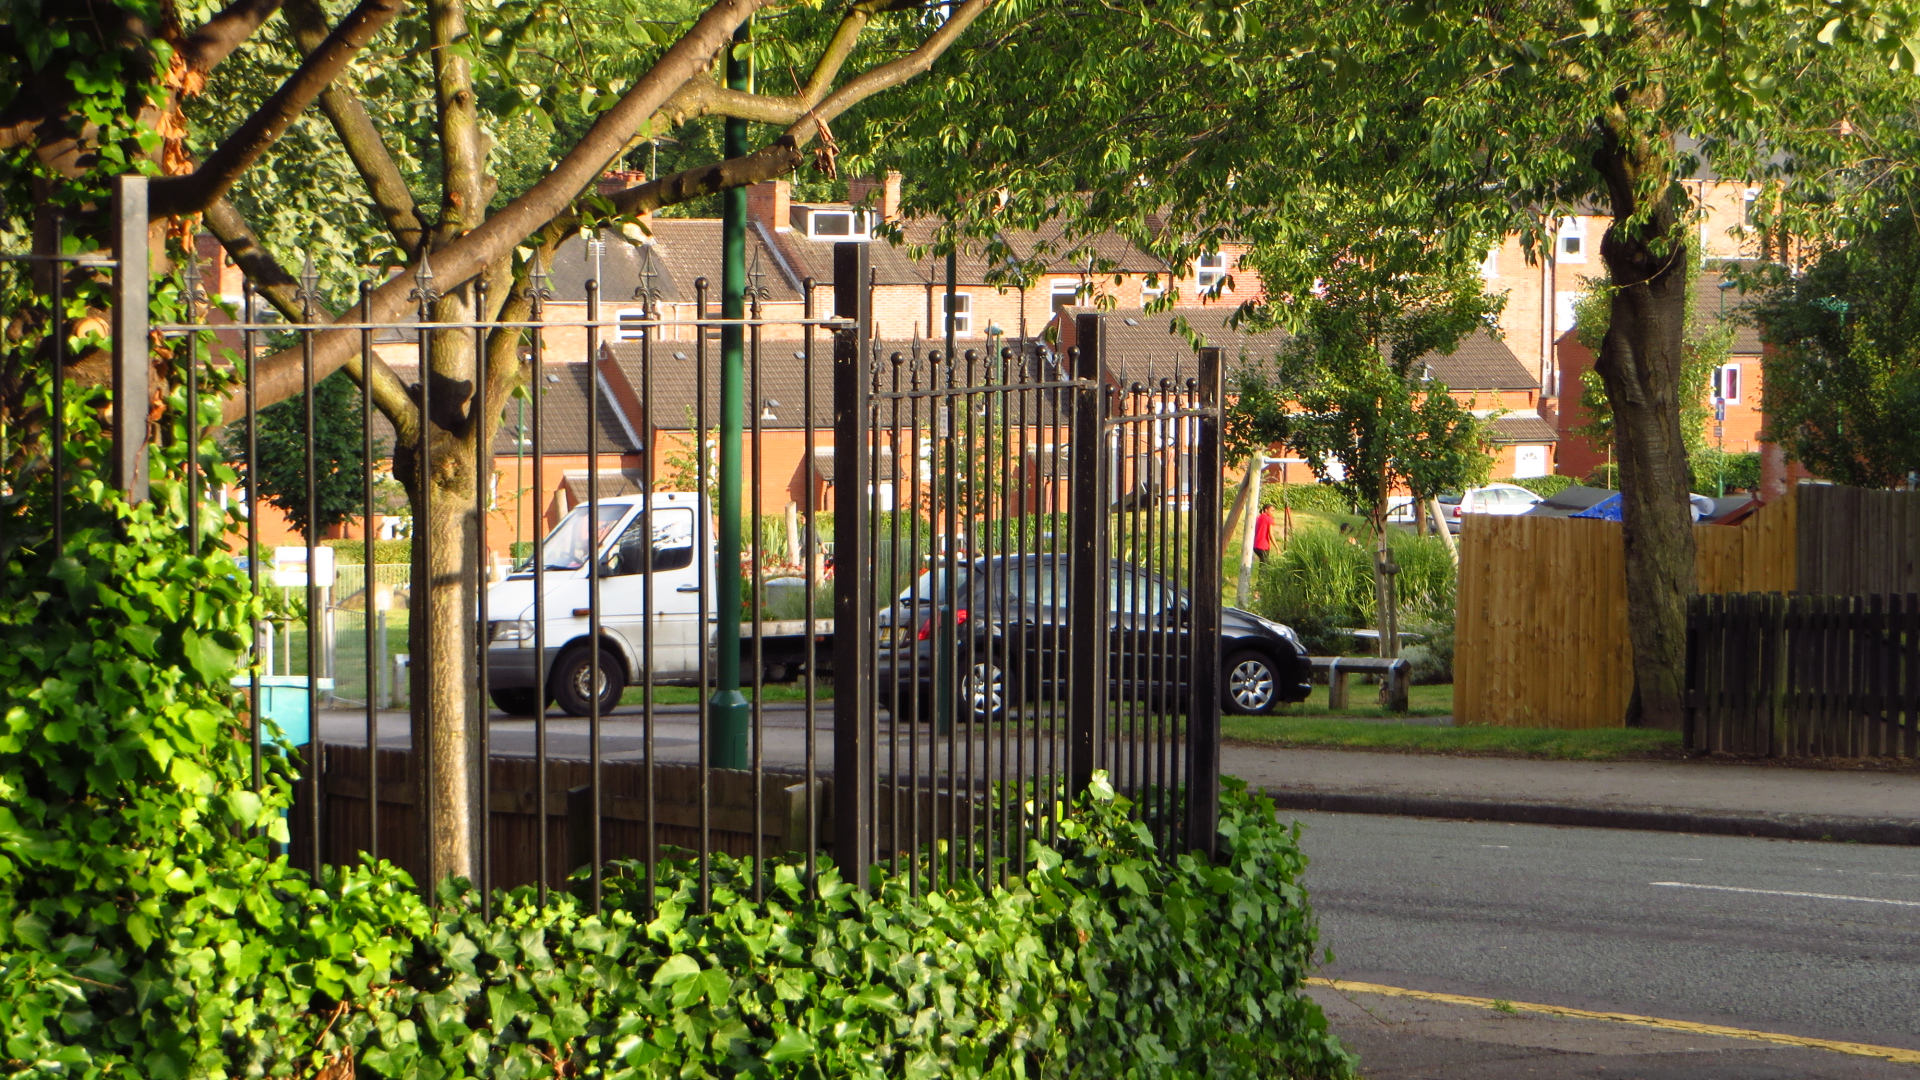 cars parked in a lot through a gate